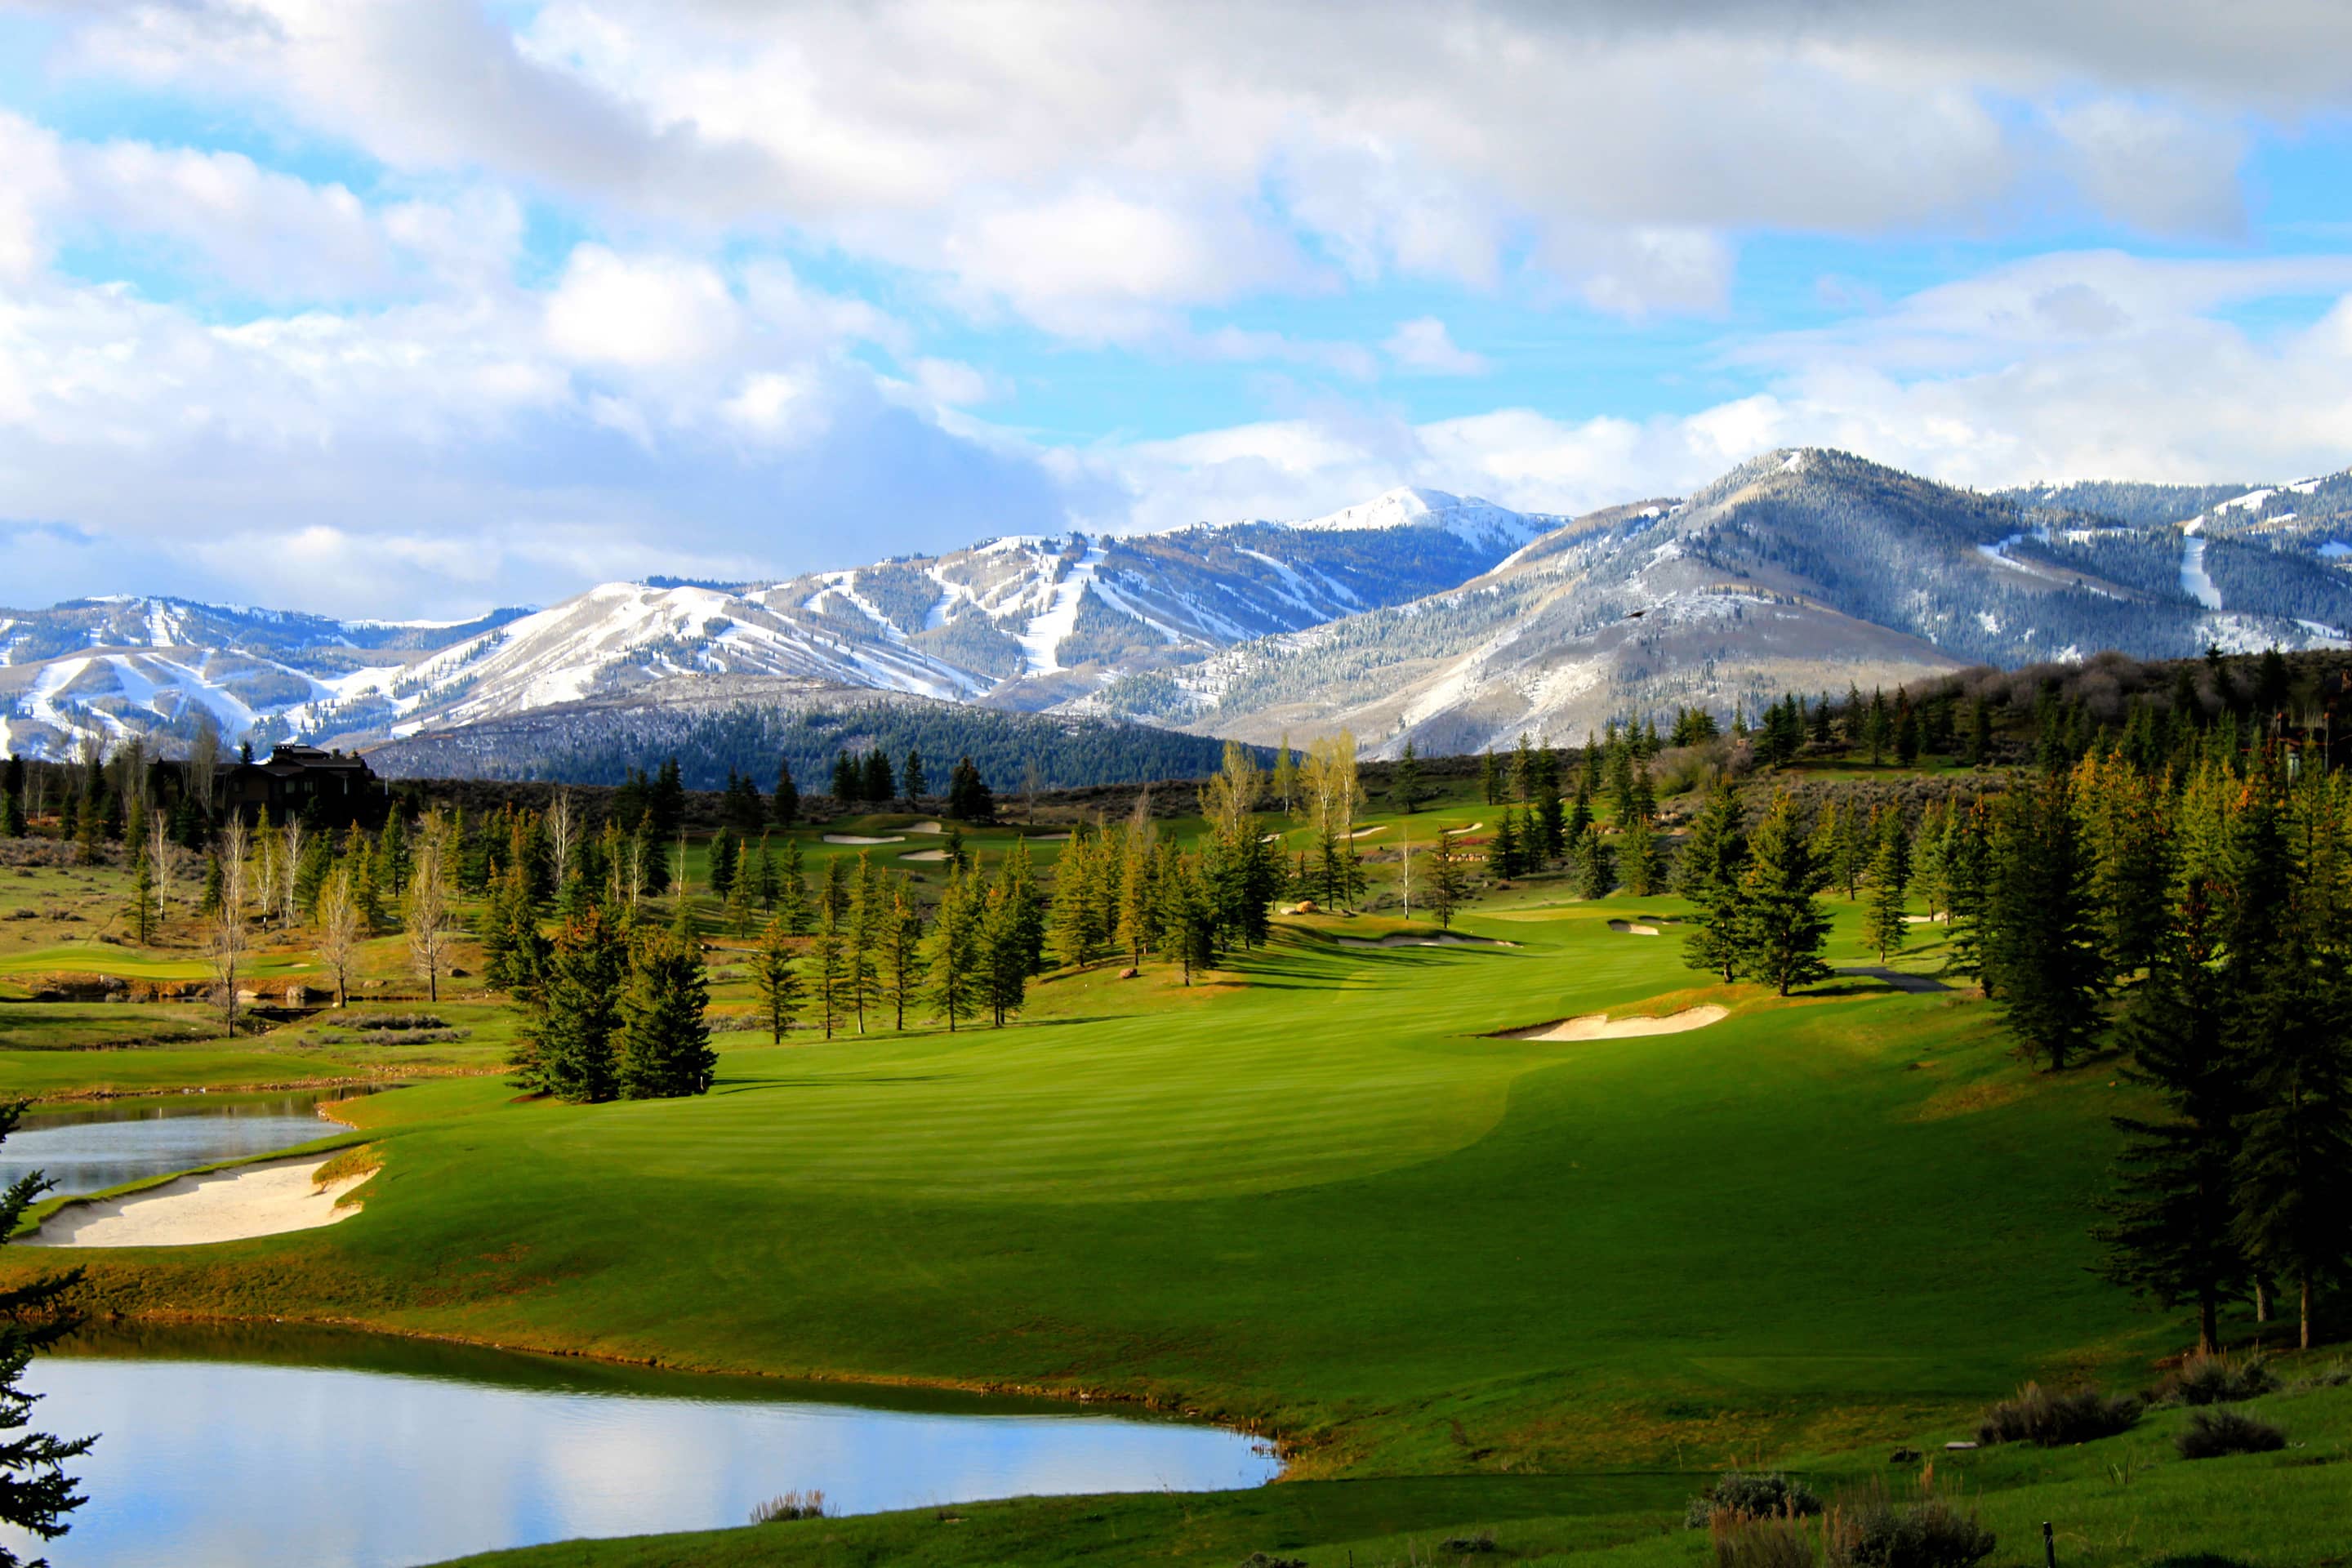 Glenwild golf course and mountain view